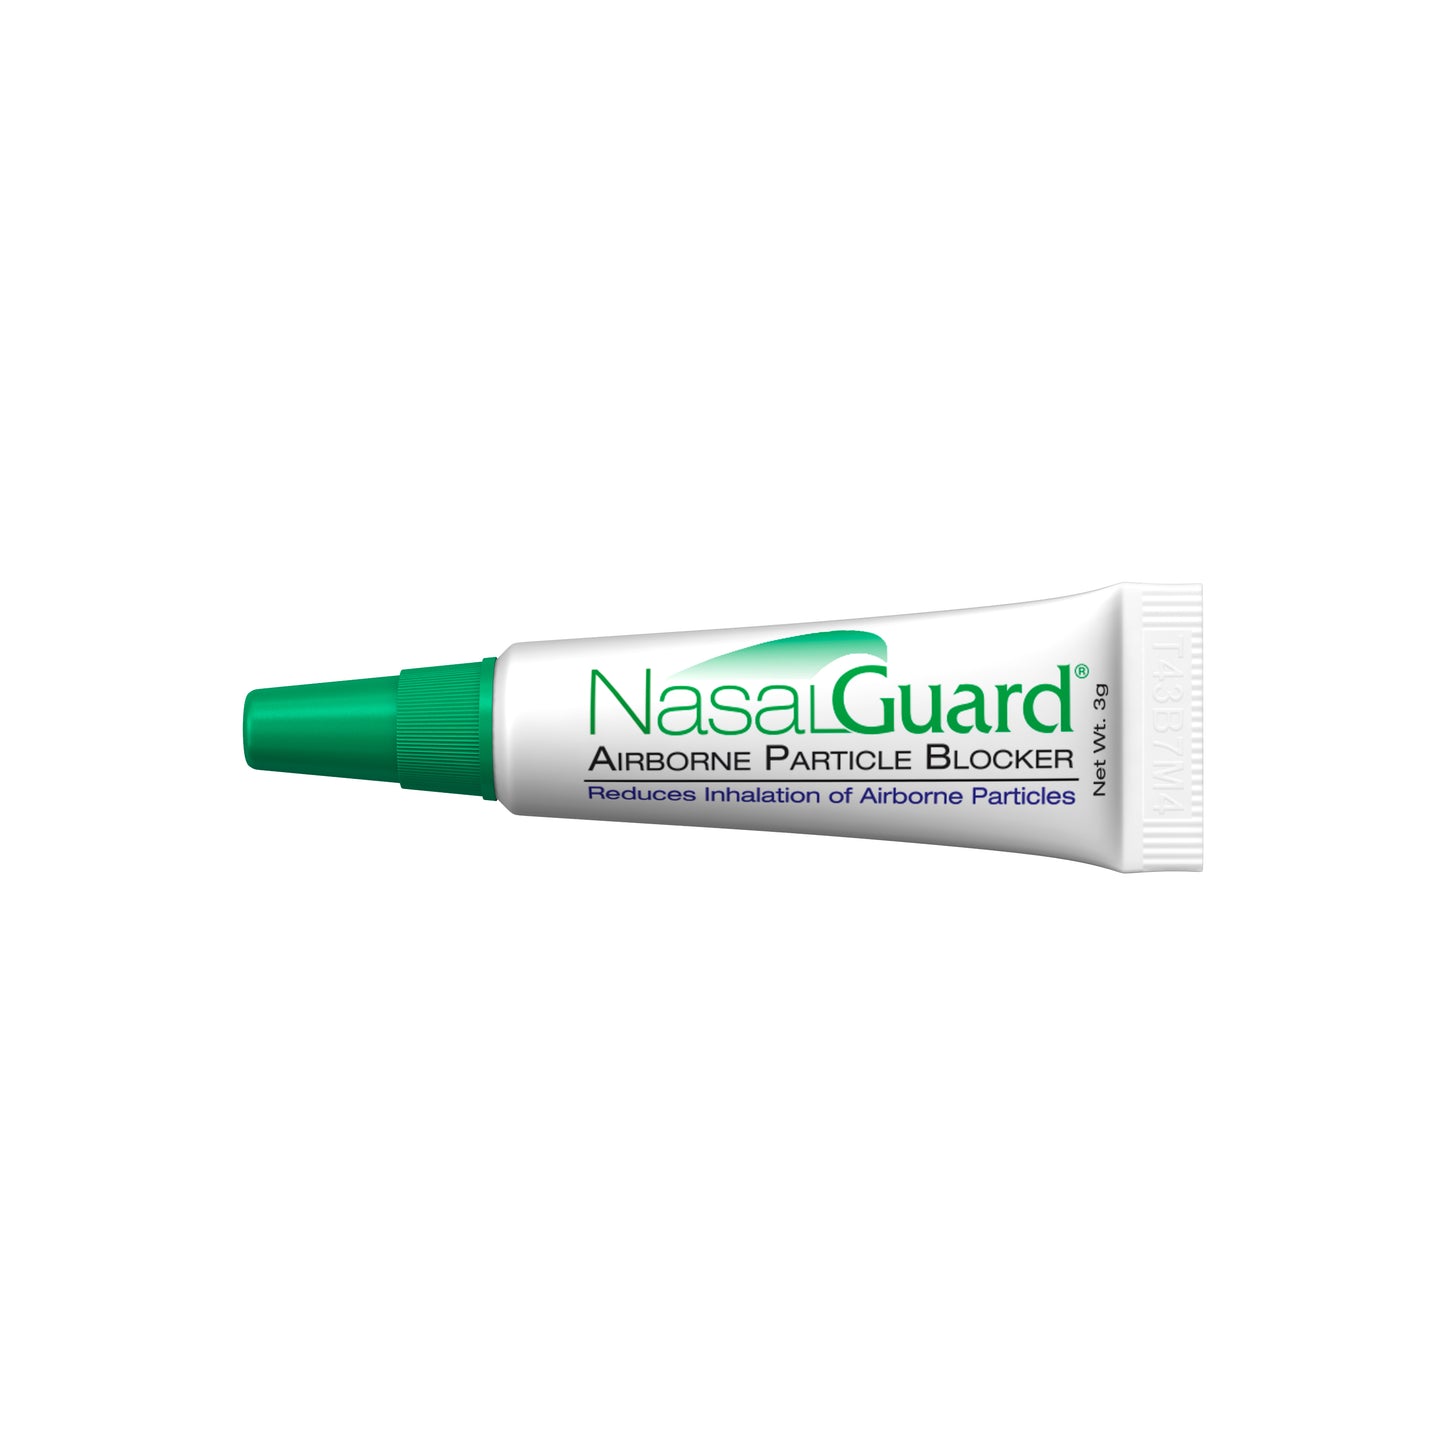 NasalGuard For Air Travelers - Airborne Particle Blocker - 3g (Pack of 6)